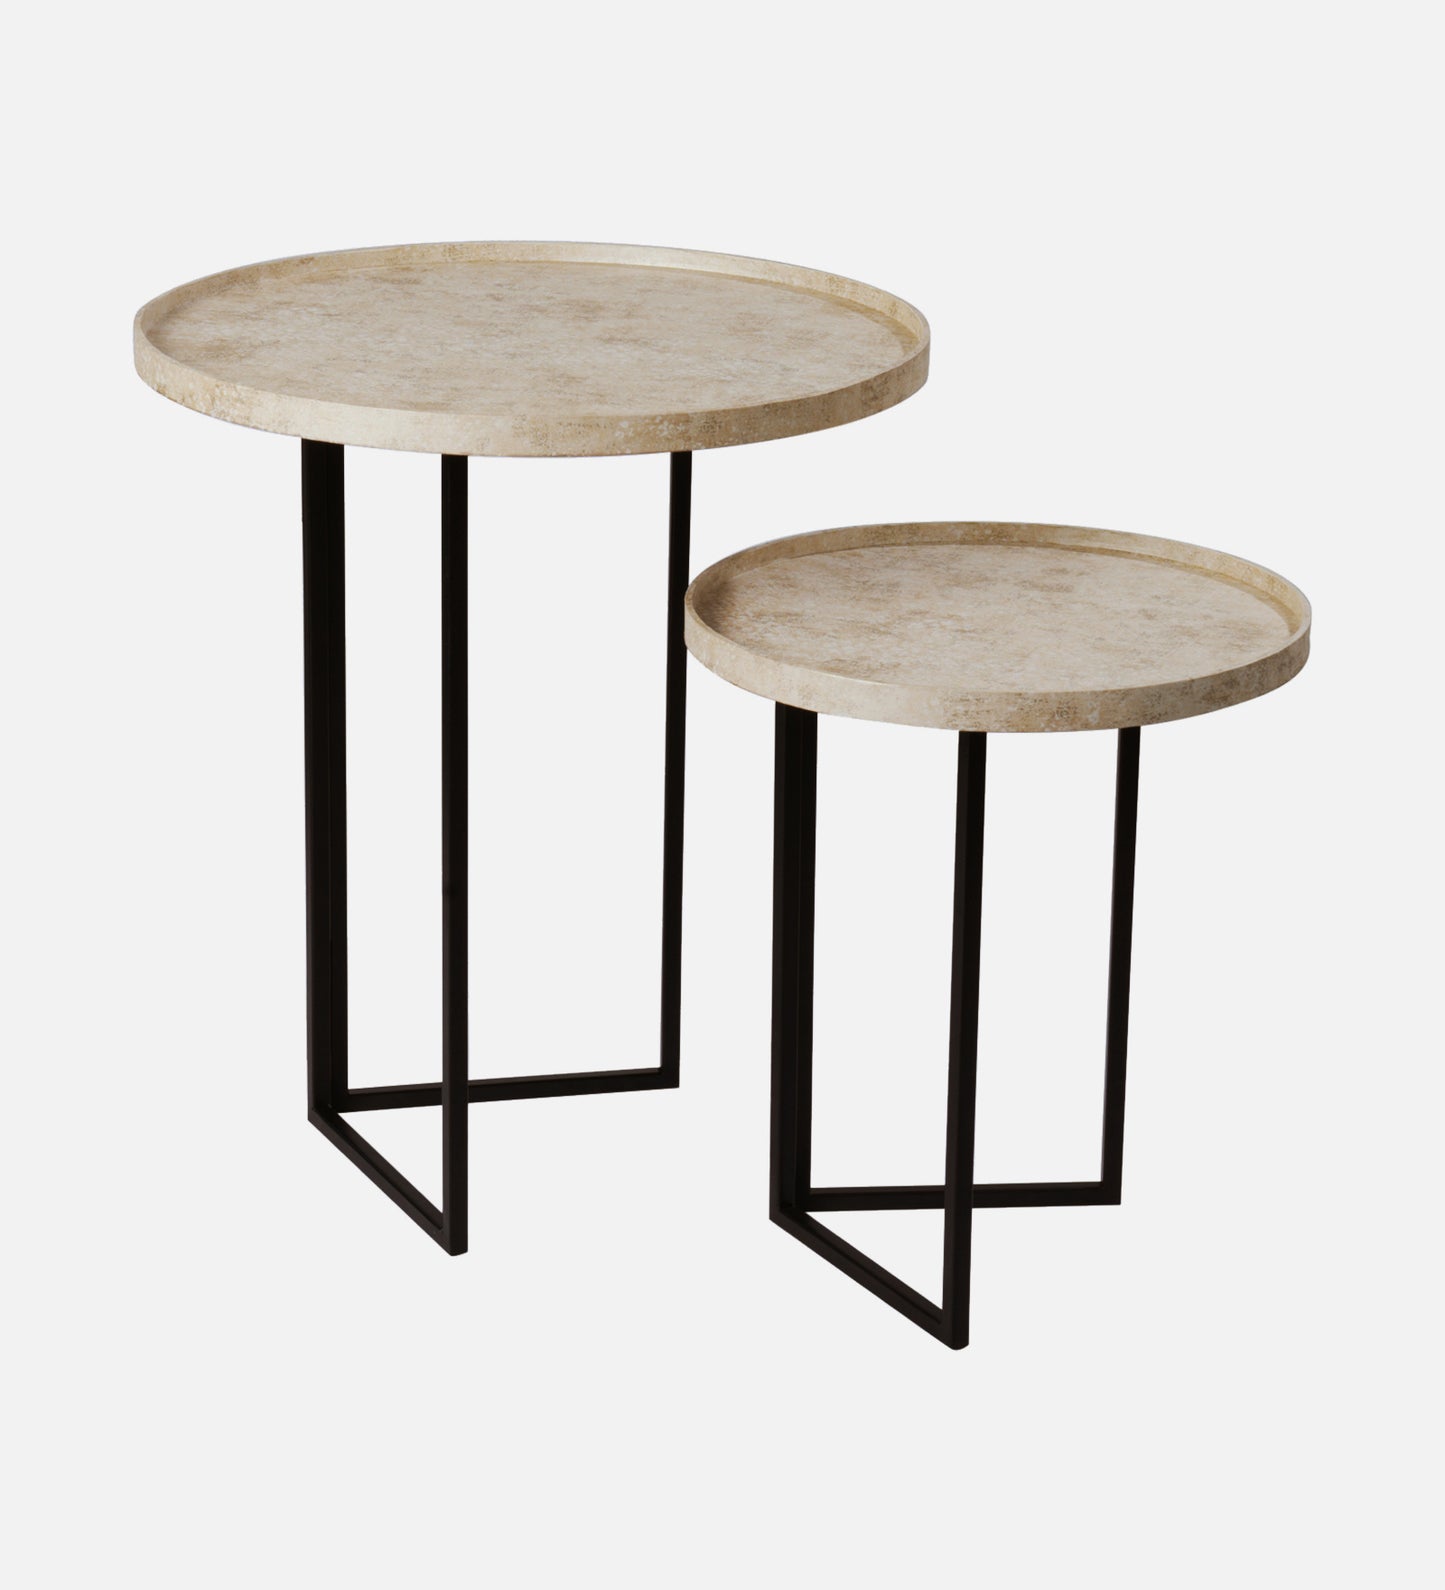 Transcendent Tinge Light Gold Round Oblique Nesting Tables, Side Tables, Wooden Tables, Living Room Decor by A Tiny Mistake